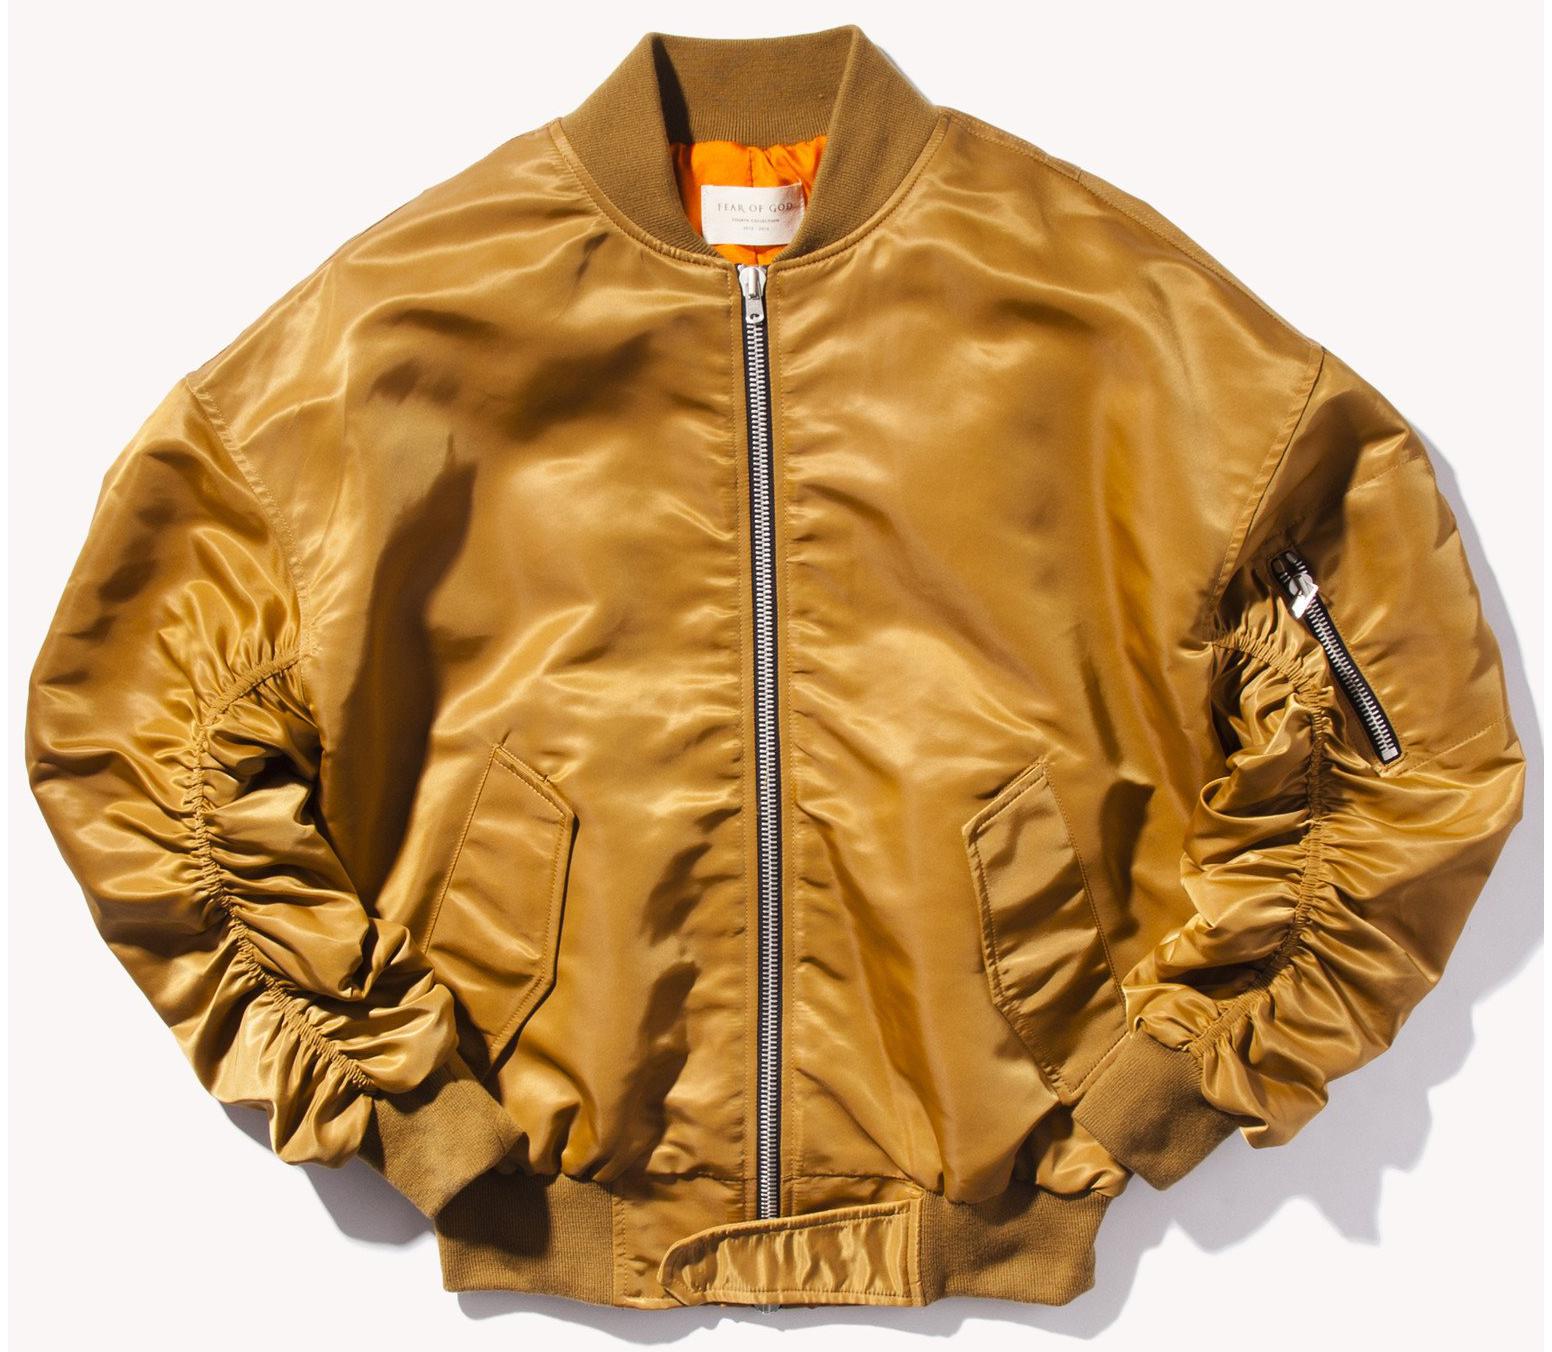 FEAR OF GOD Bomber Jacket Gold - Fourth Collection